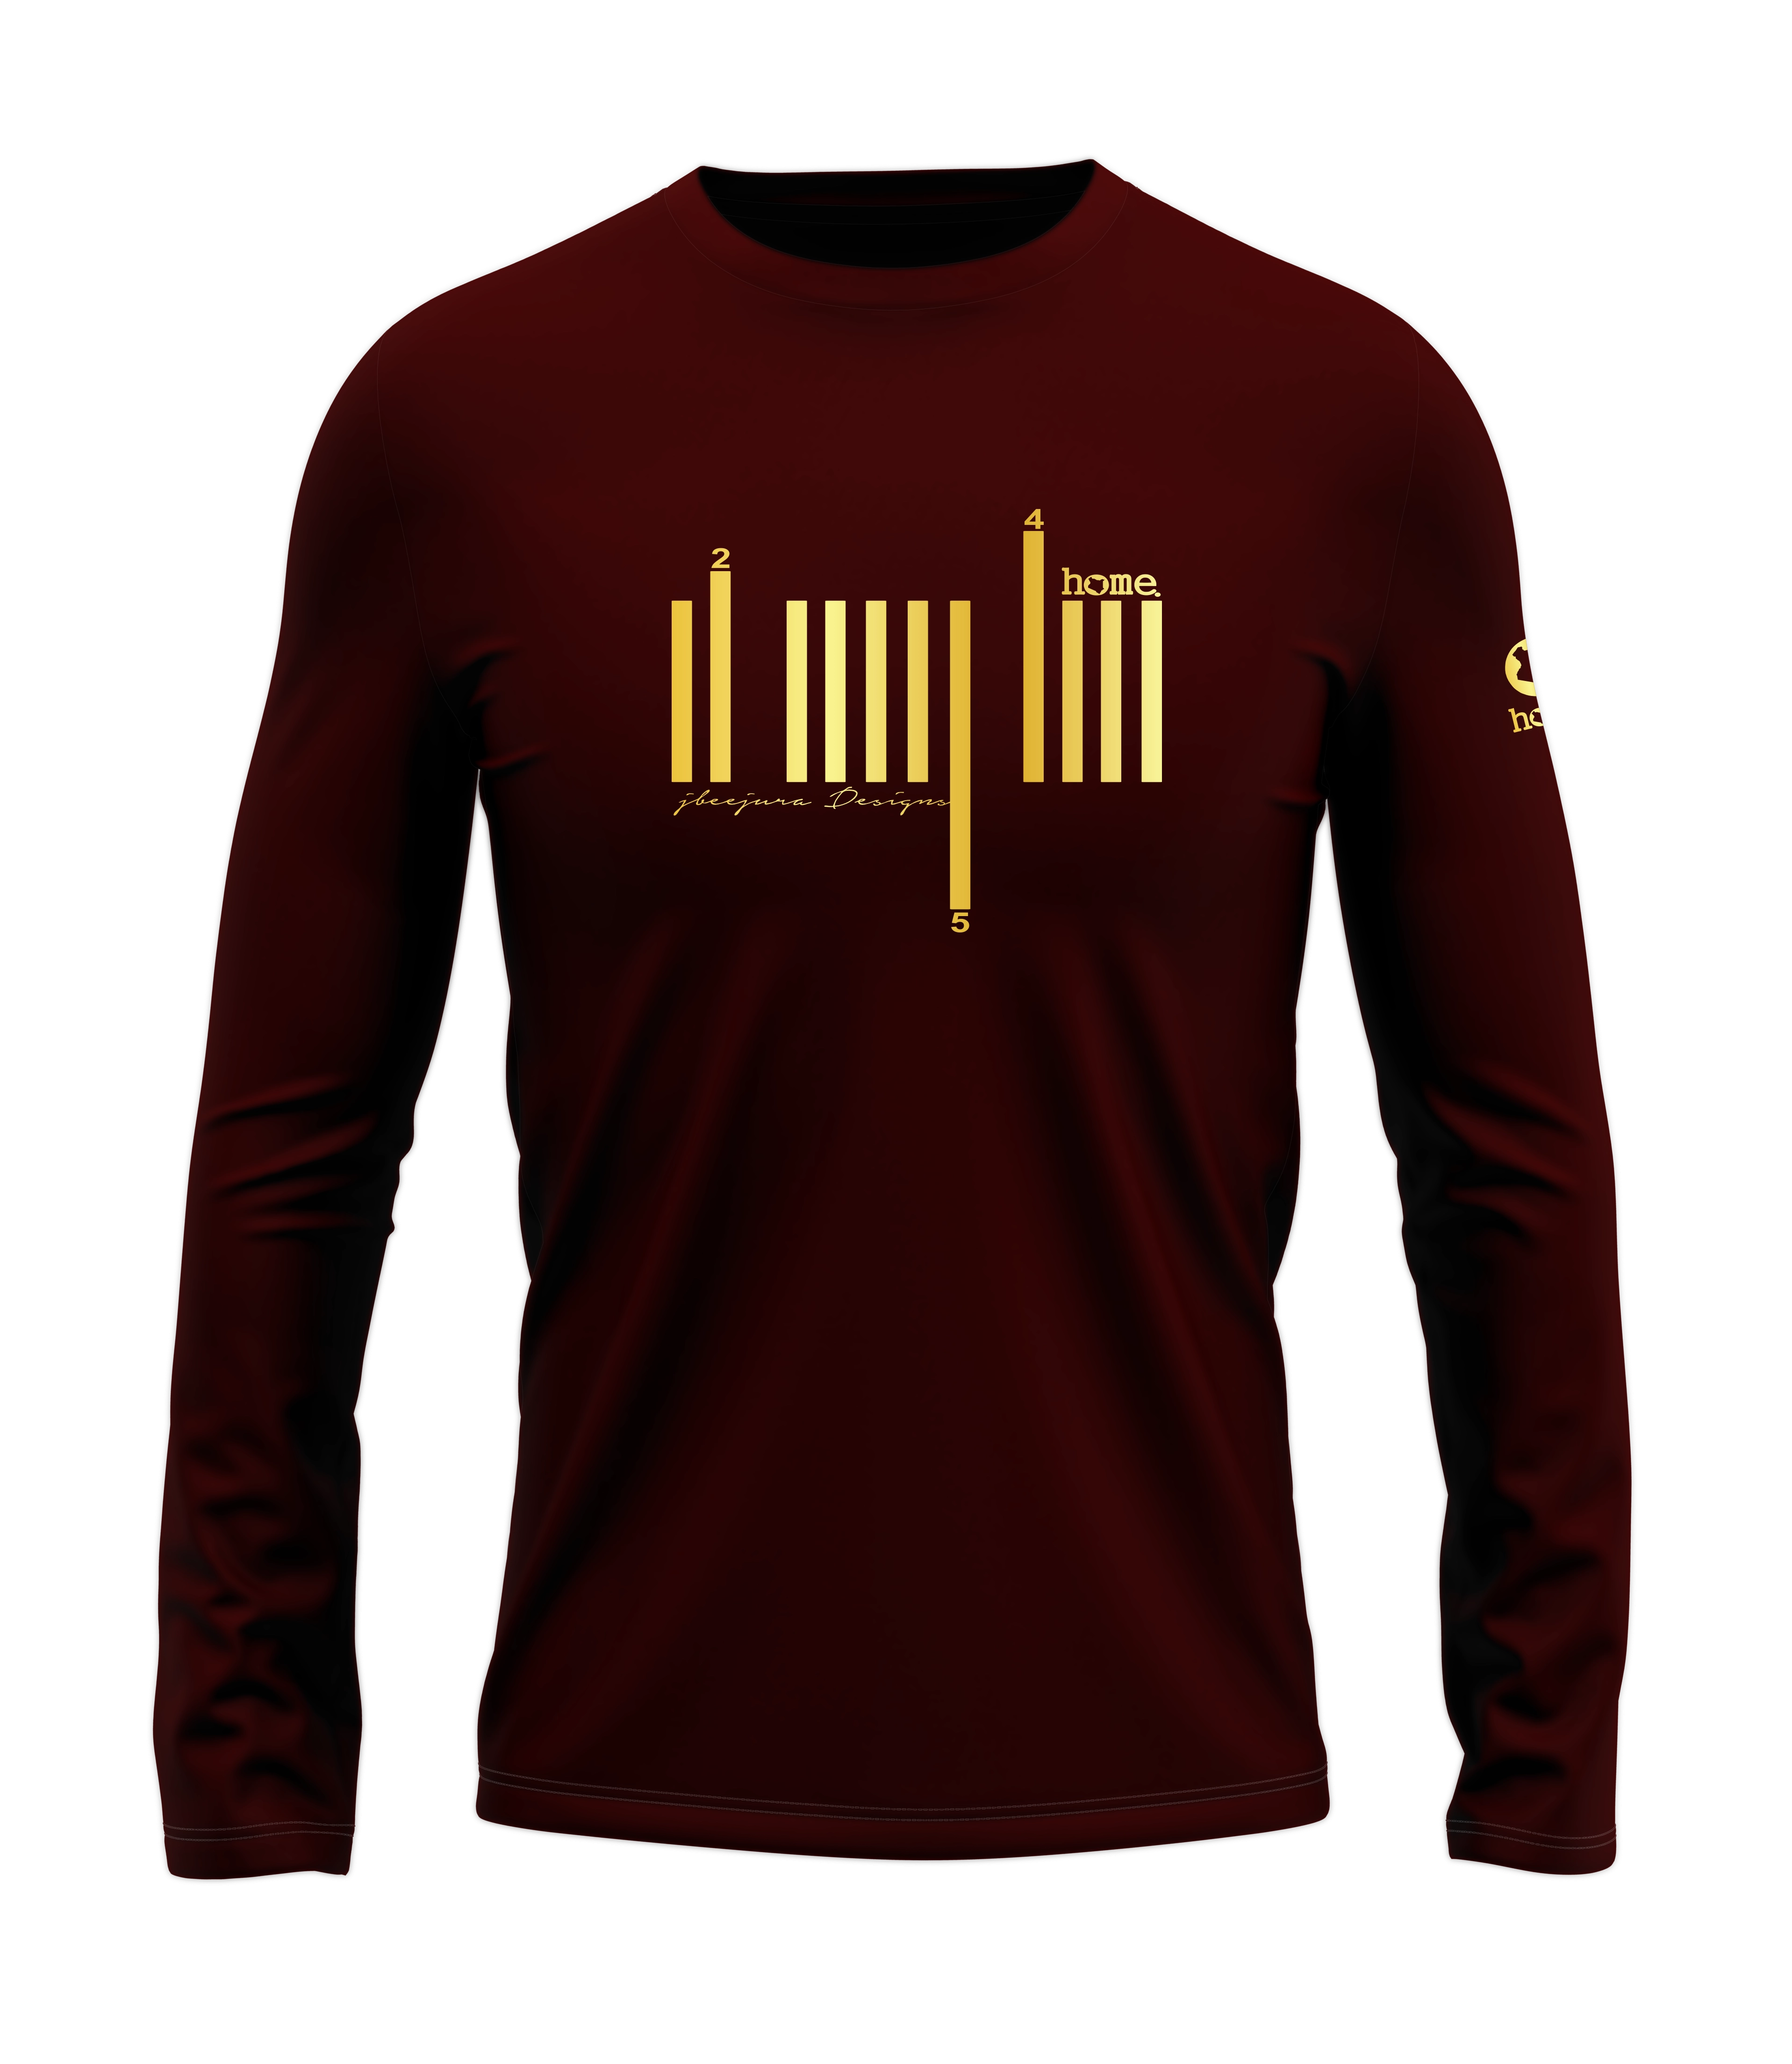 home_254 LONG-SLEEVED MAROON T-SHIRT WITH A GOLD BARS PRINT – COTTON PLUS FABRIC